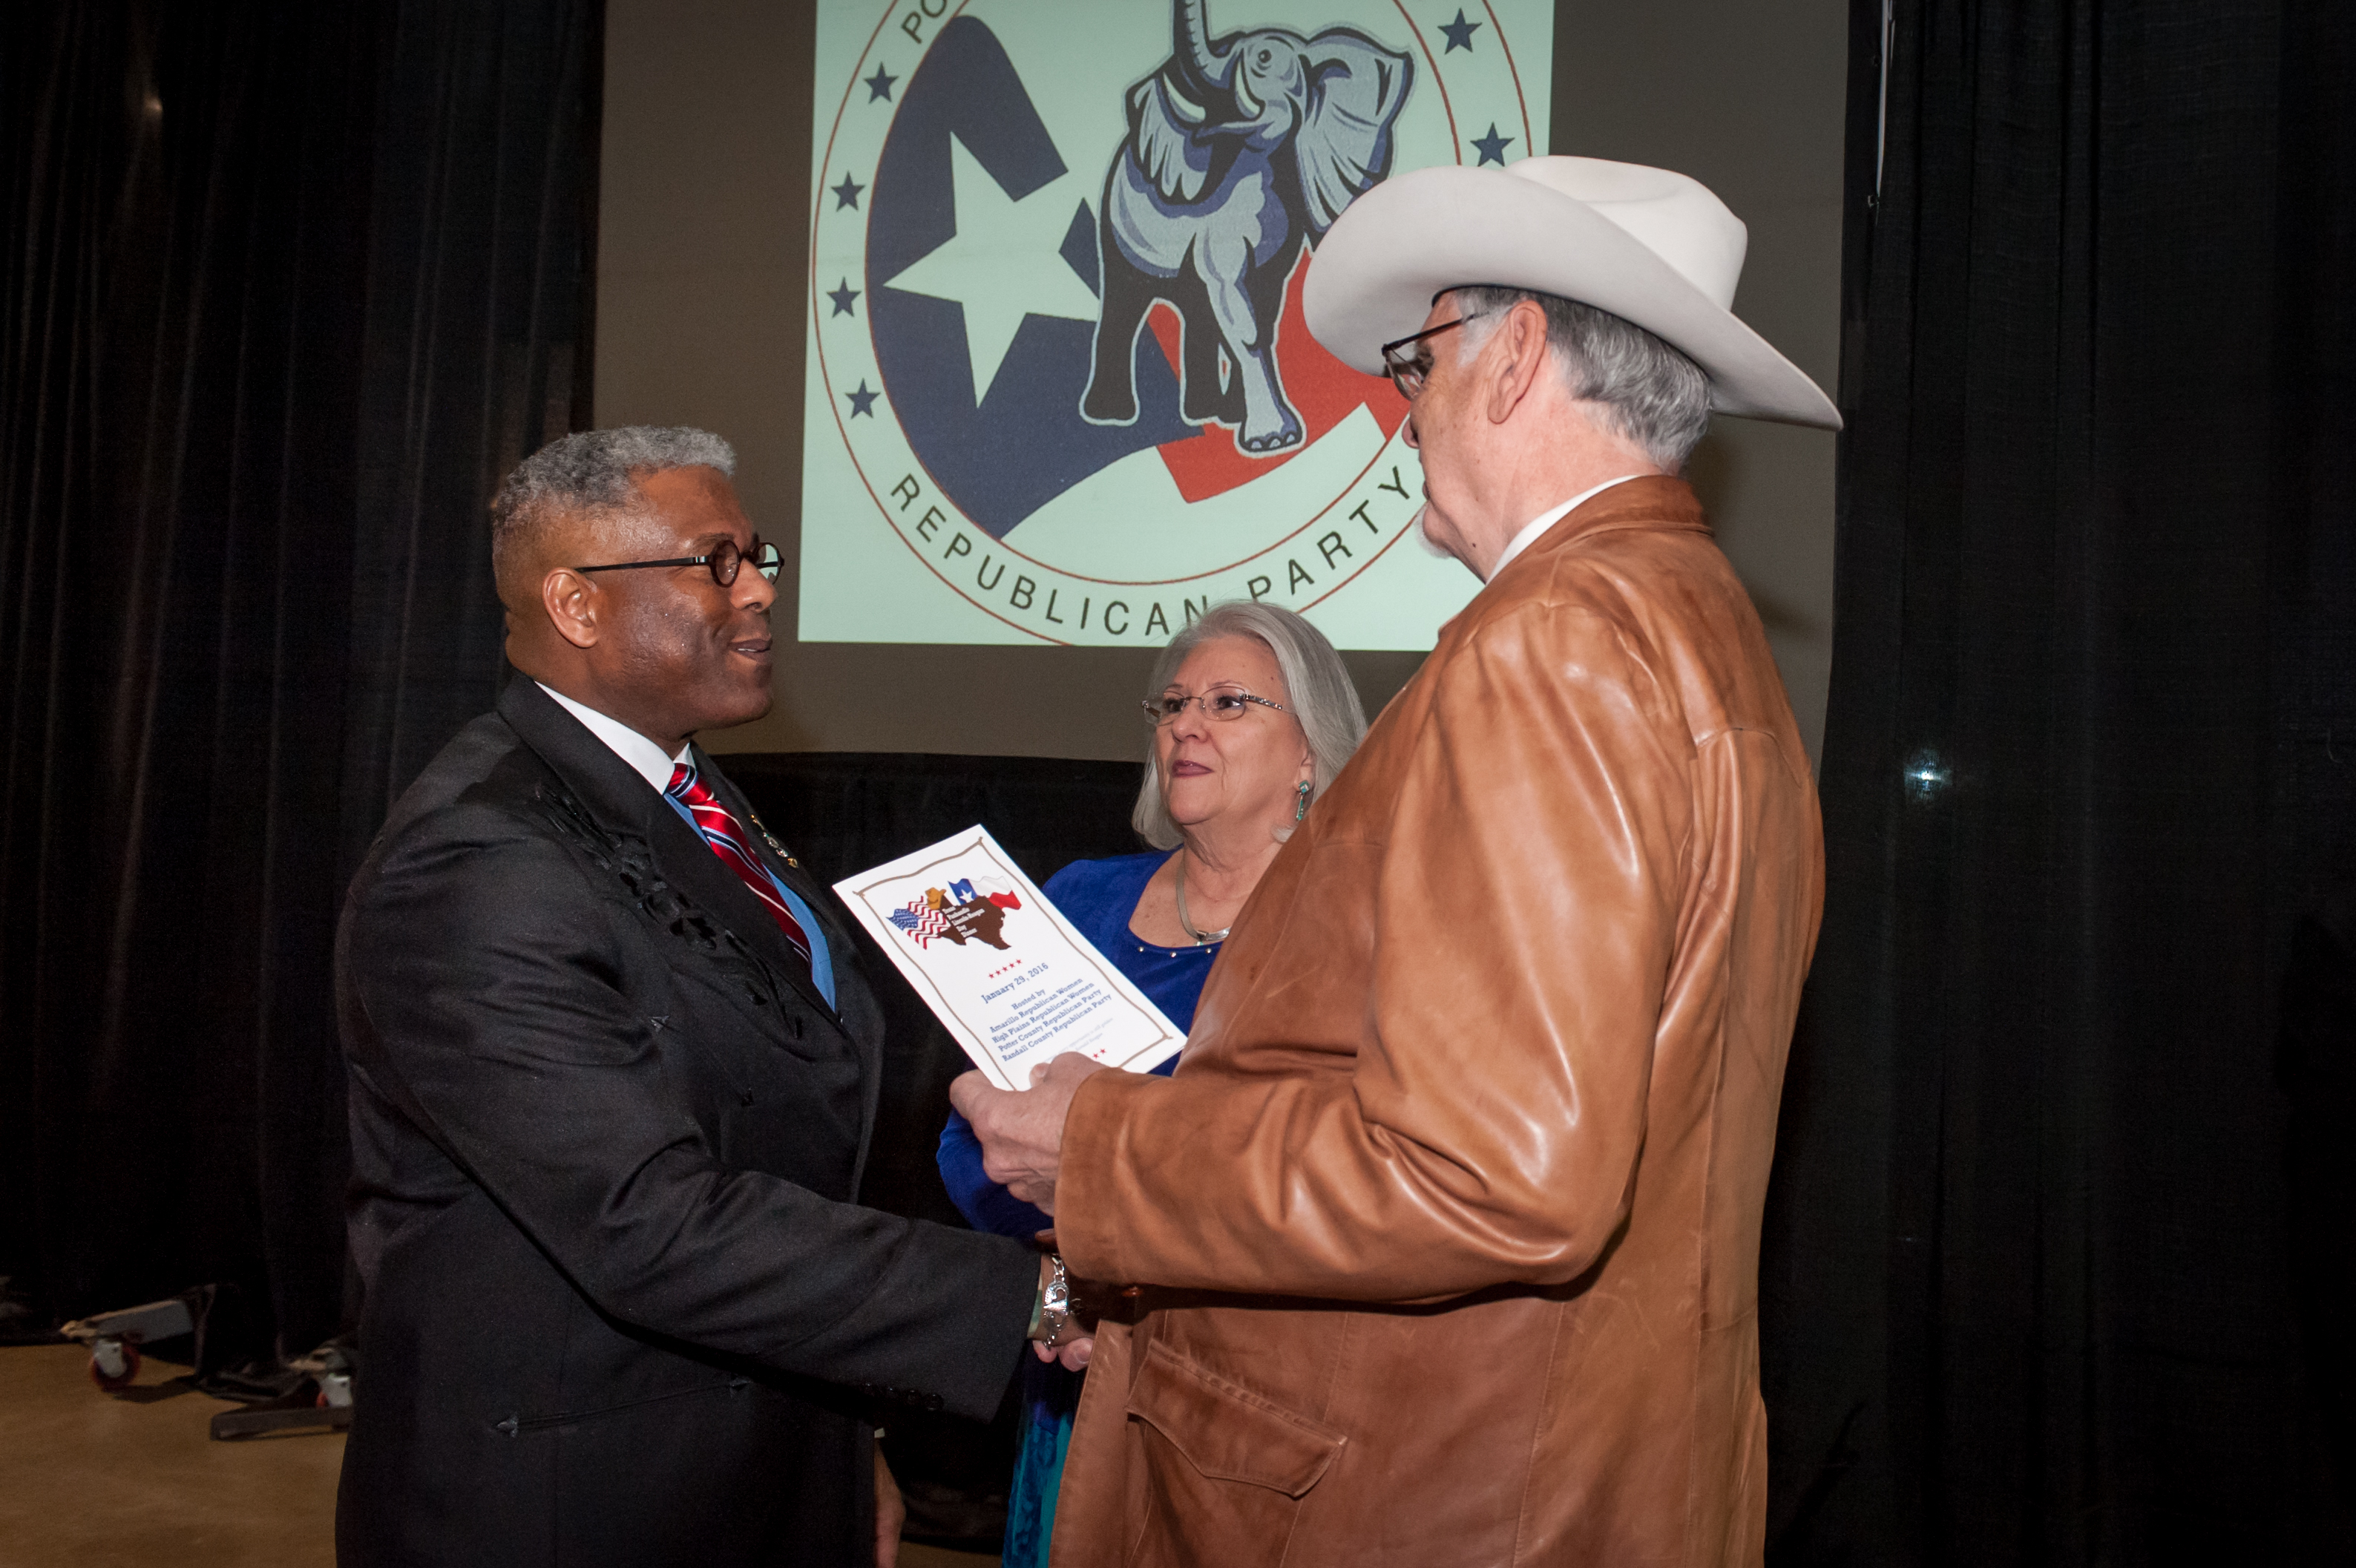 Shaie Williams for AGN Media. Lt. Colonel Allen West with Linda and Tom Hicks at the Texas Panhandle Lincoln-Reagan Day Dinner hosted by the local Republican party groups held at The Rex Baxter Building in Amarillo, TX on January 29, 2016